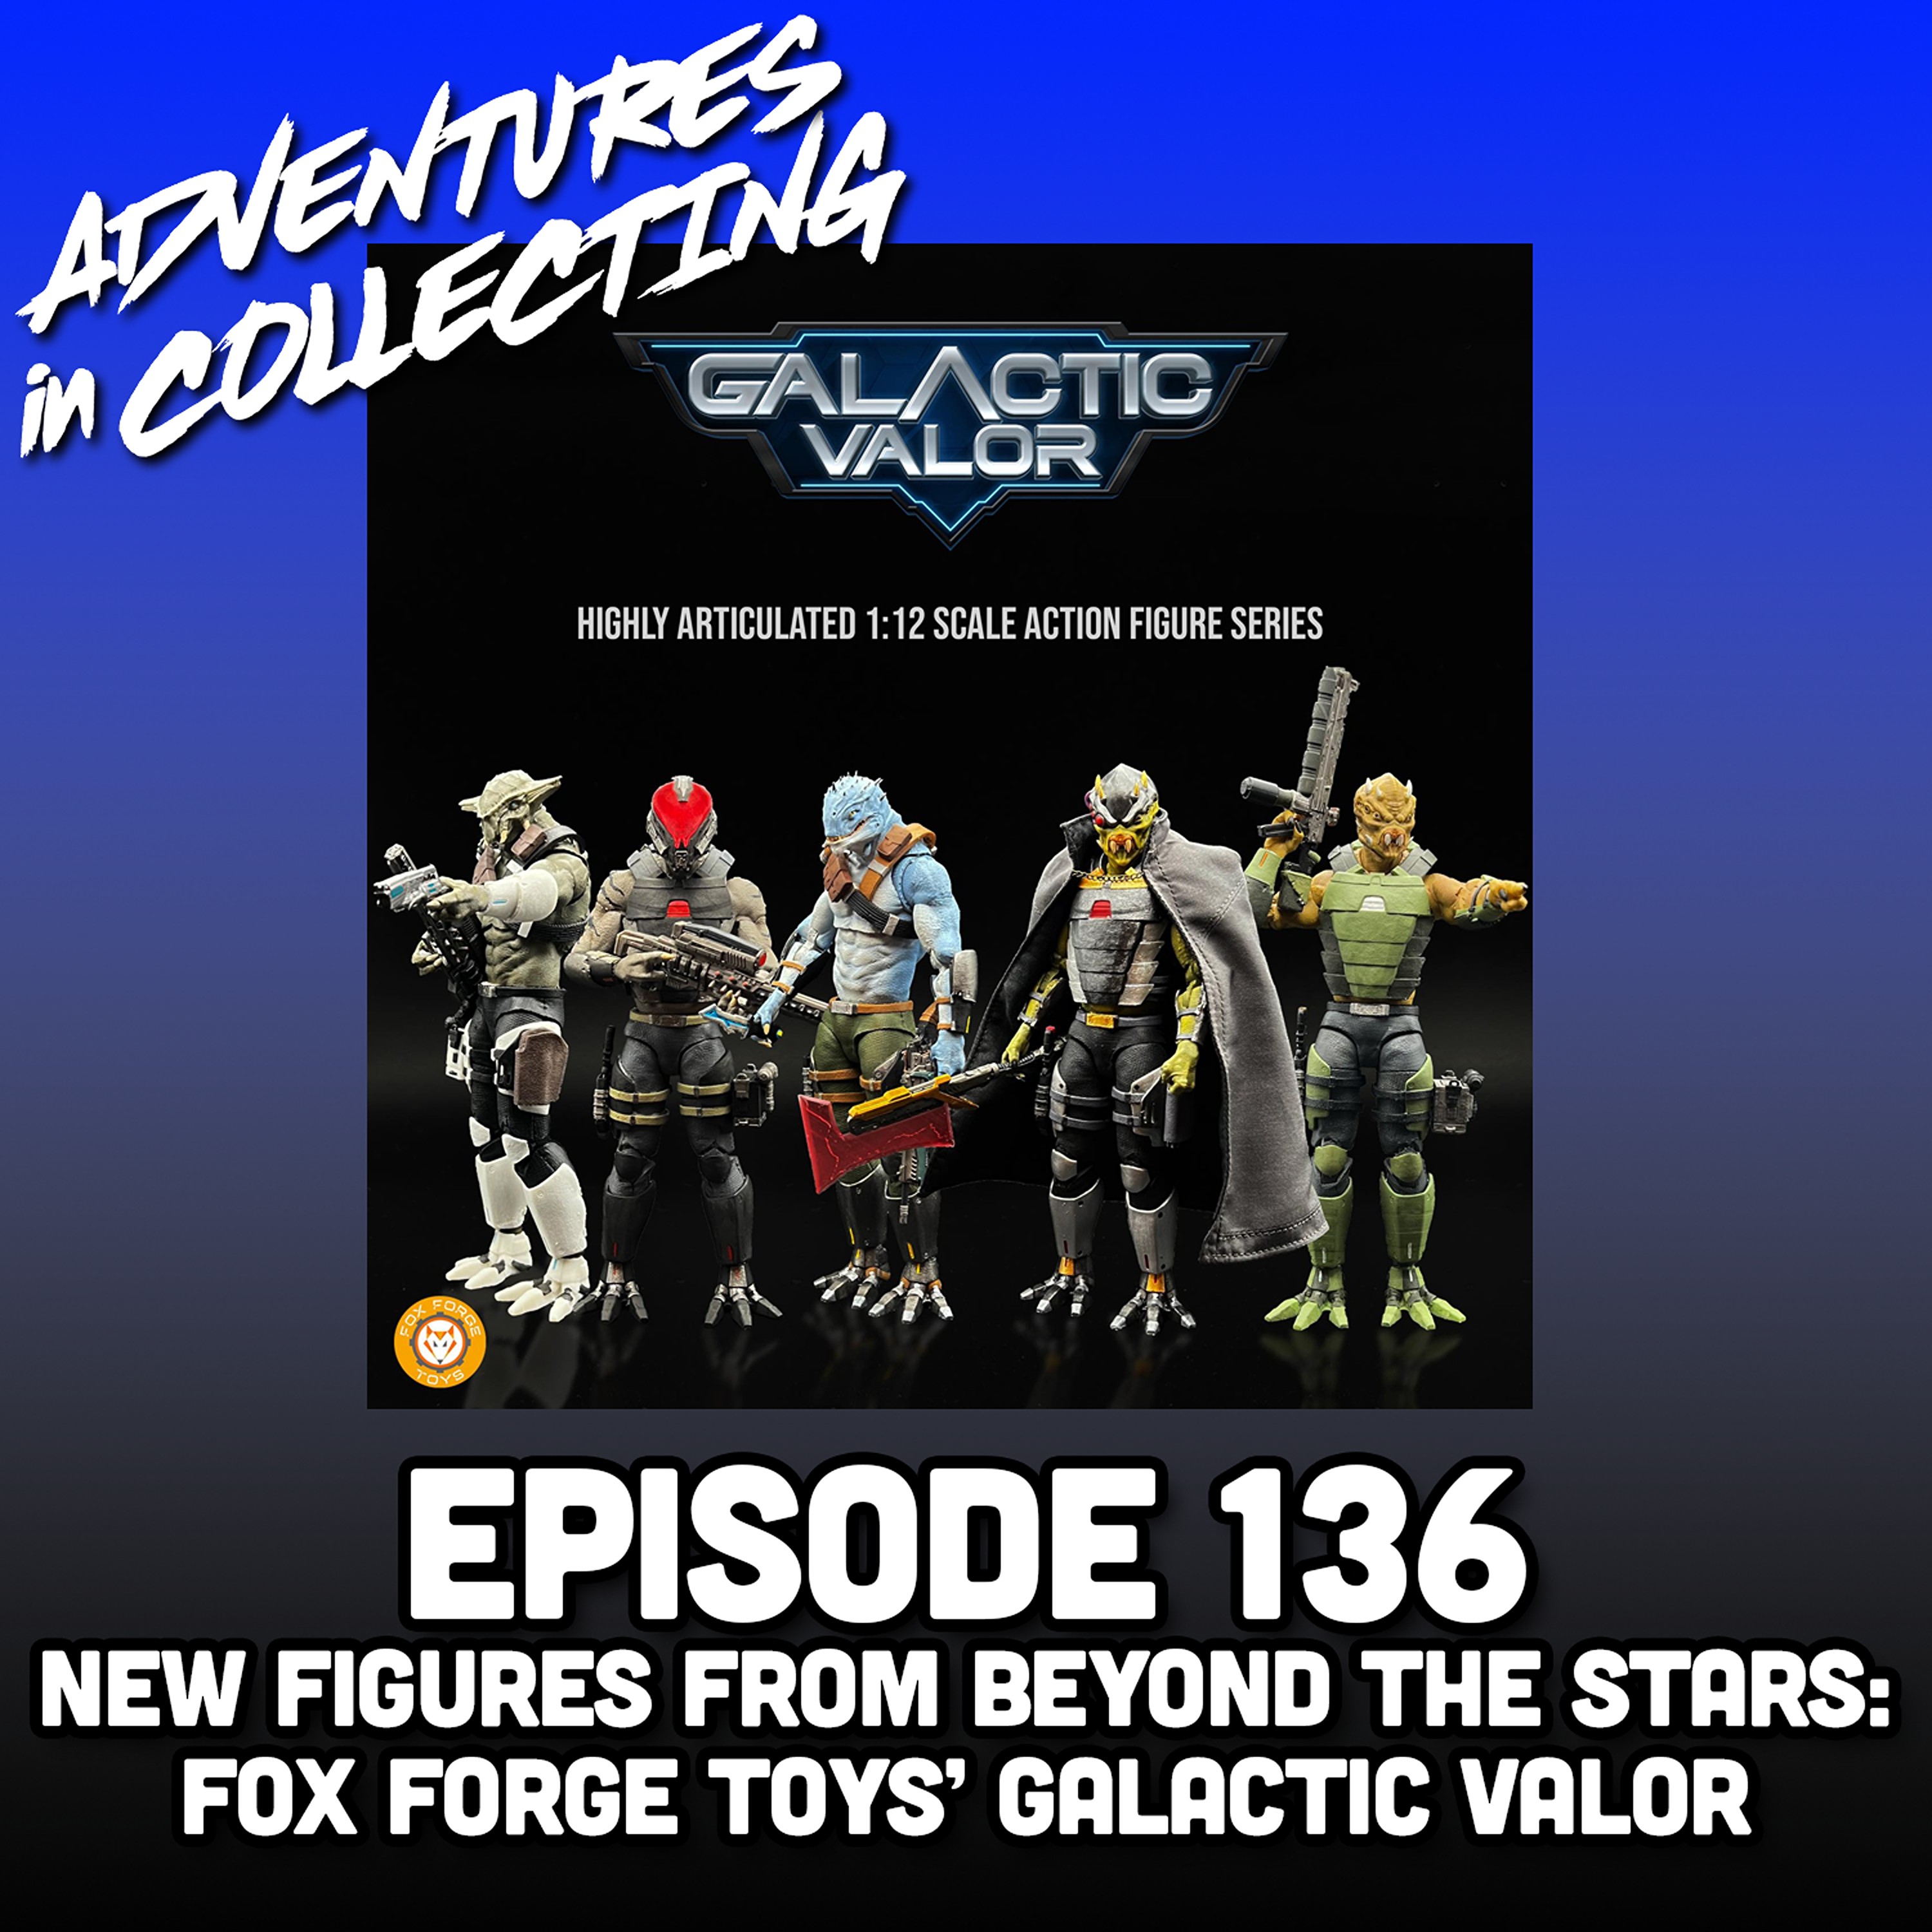 New Figures from Beyond the Stars: Fox Forge Toys’ Galactic Valor